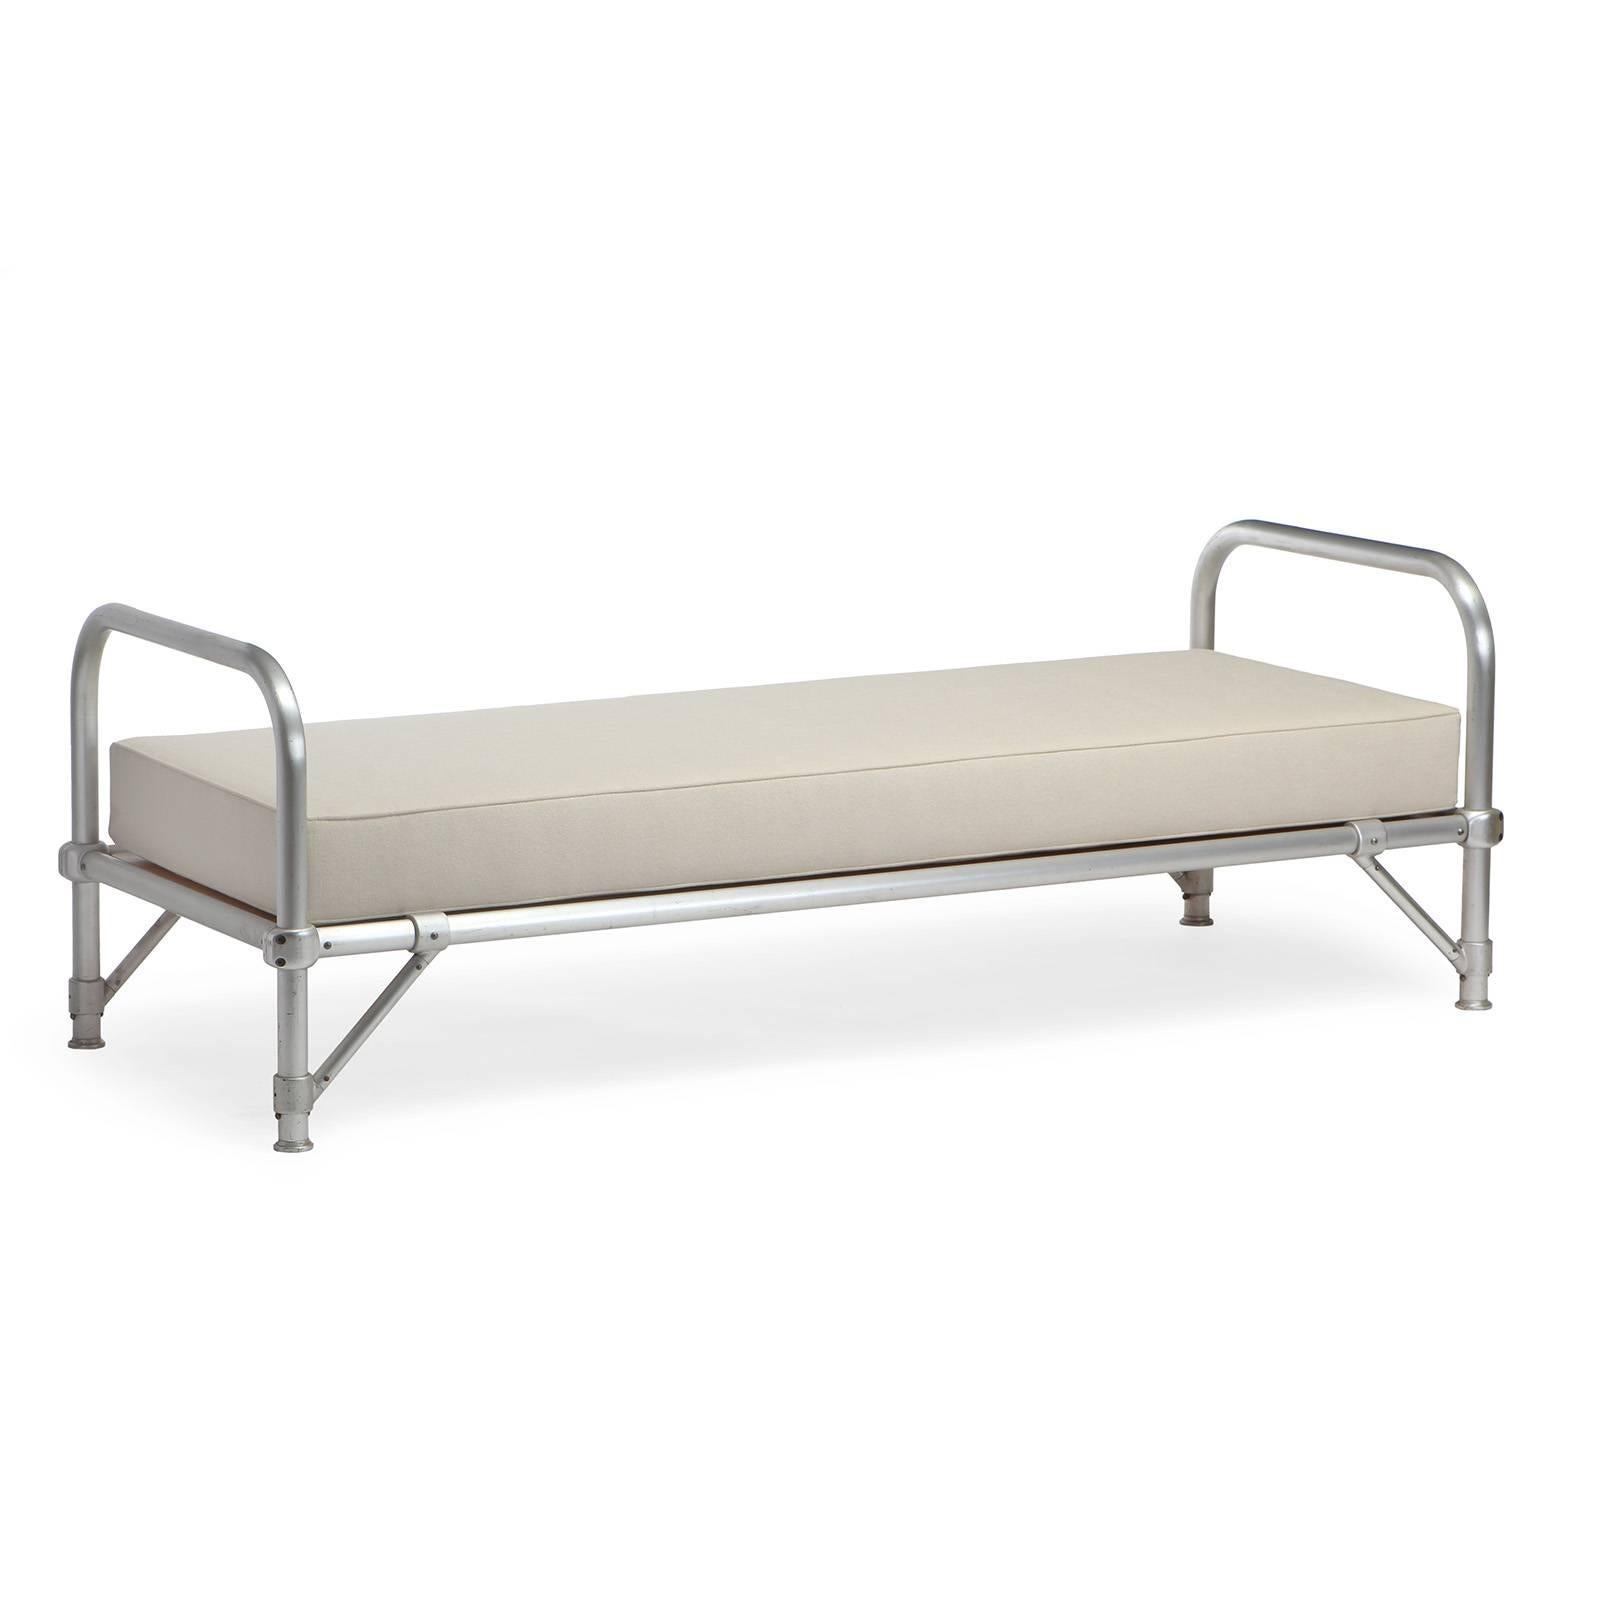 A well crafted army cot or daybed having an anodized tubular aluminum frame. 